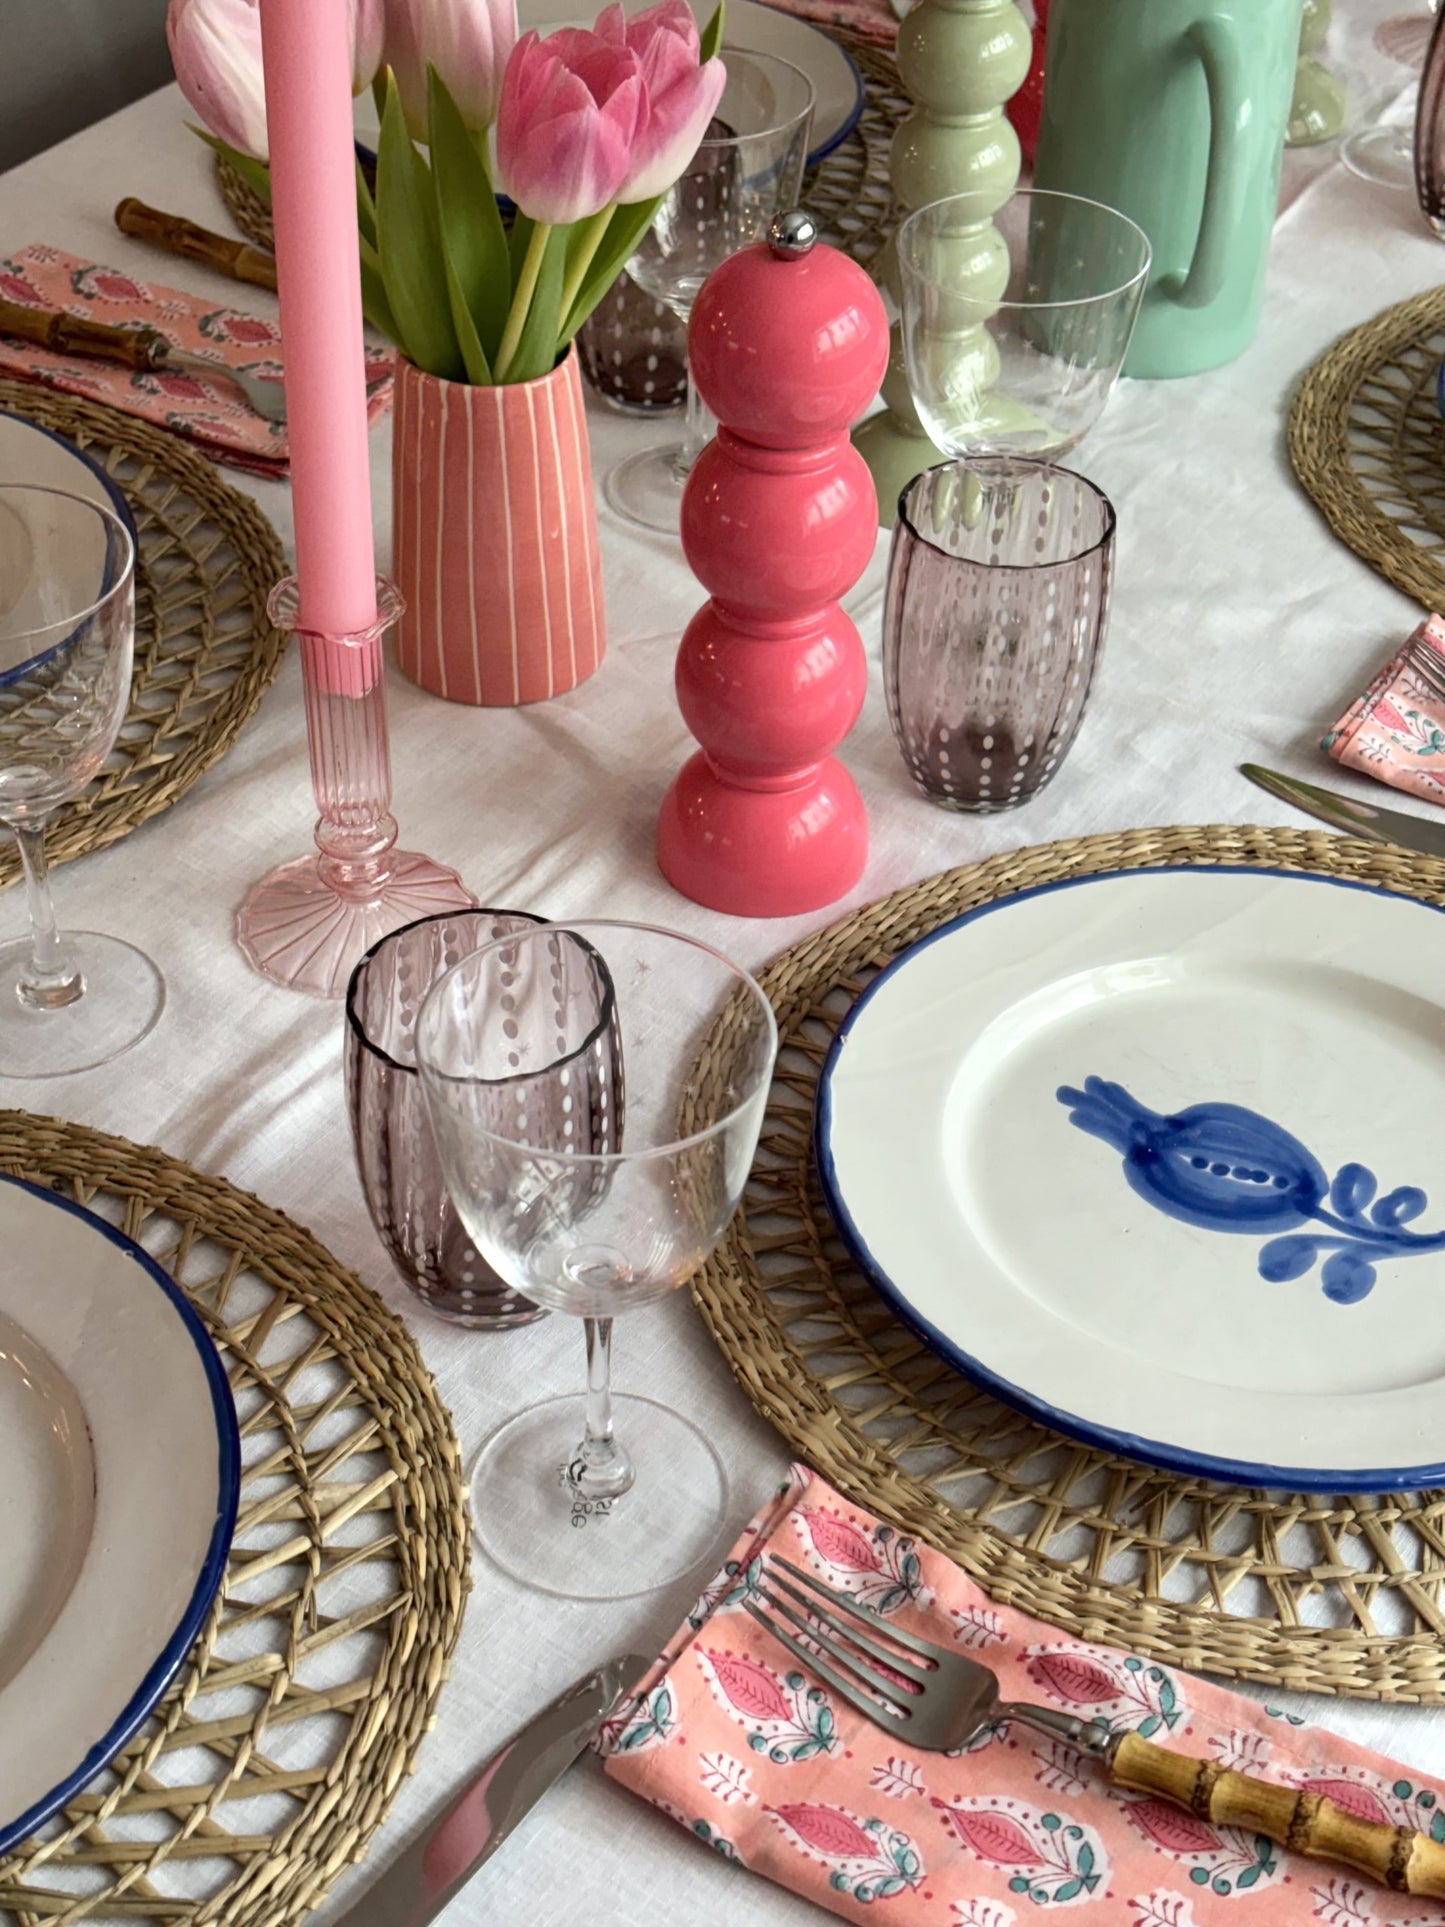 A table setting featuring tulips, pink candles and a watermelon bobbin pepper grinder.